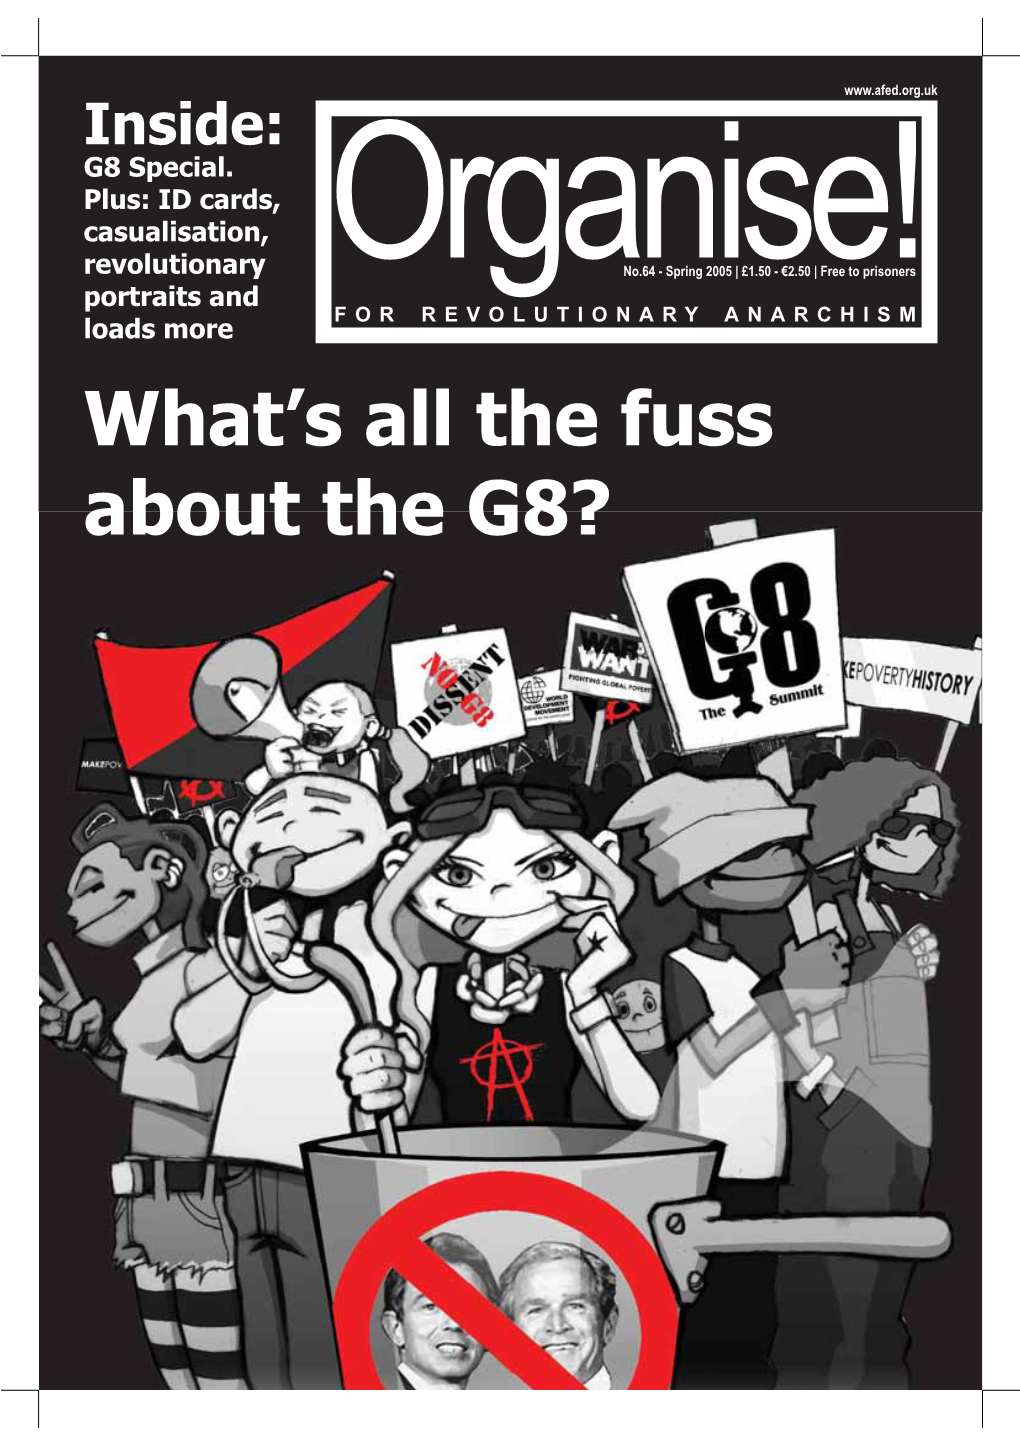 Organise! Are Still the VAAAG Consisted of Thousands of People Ngos and Others Who Just Want to Make Available from the London Address